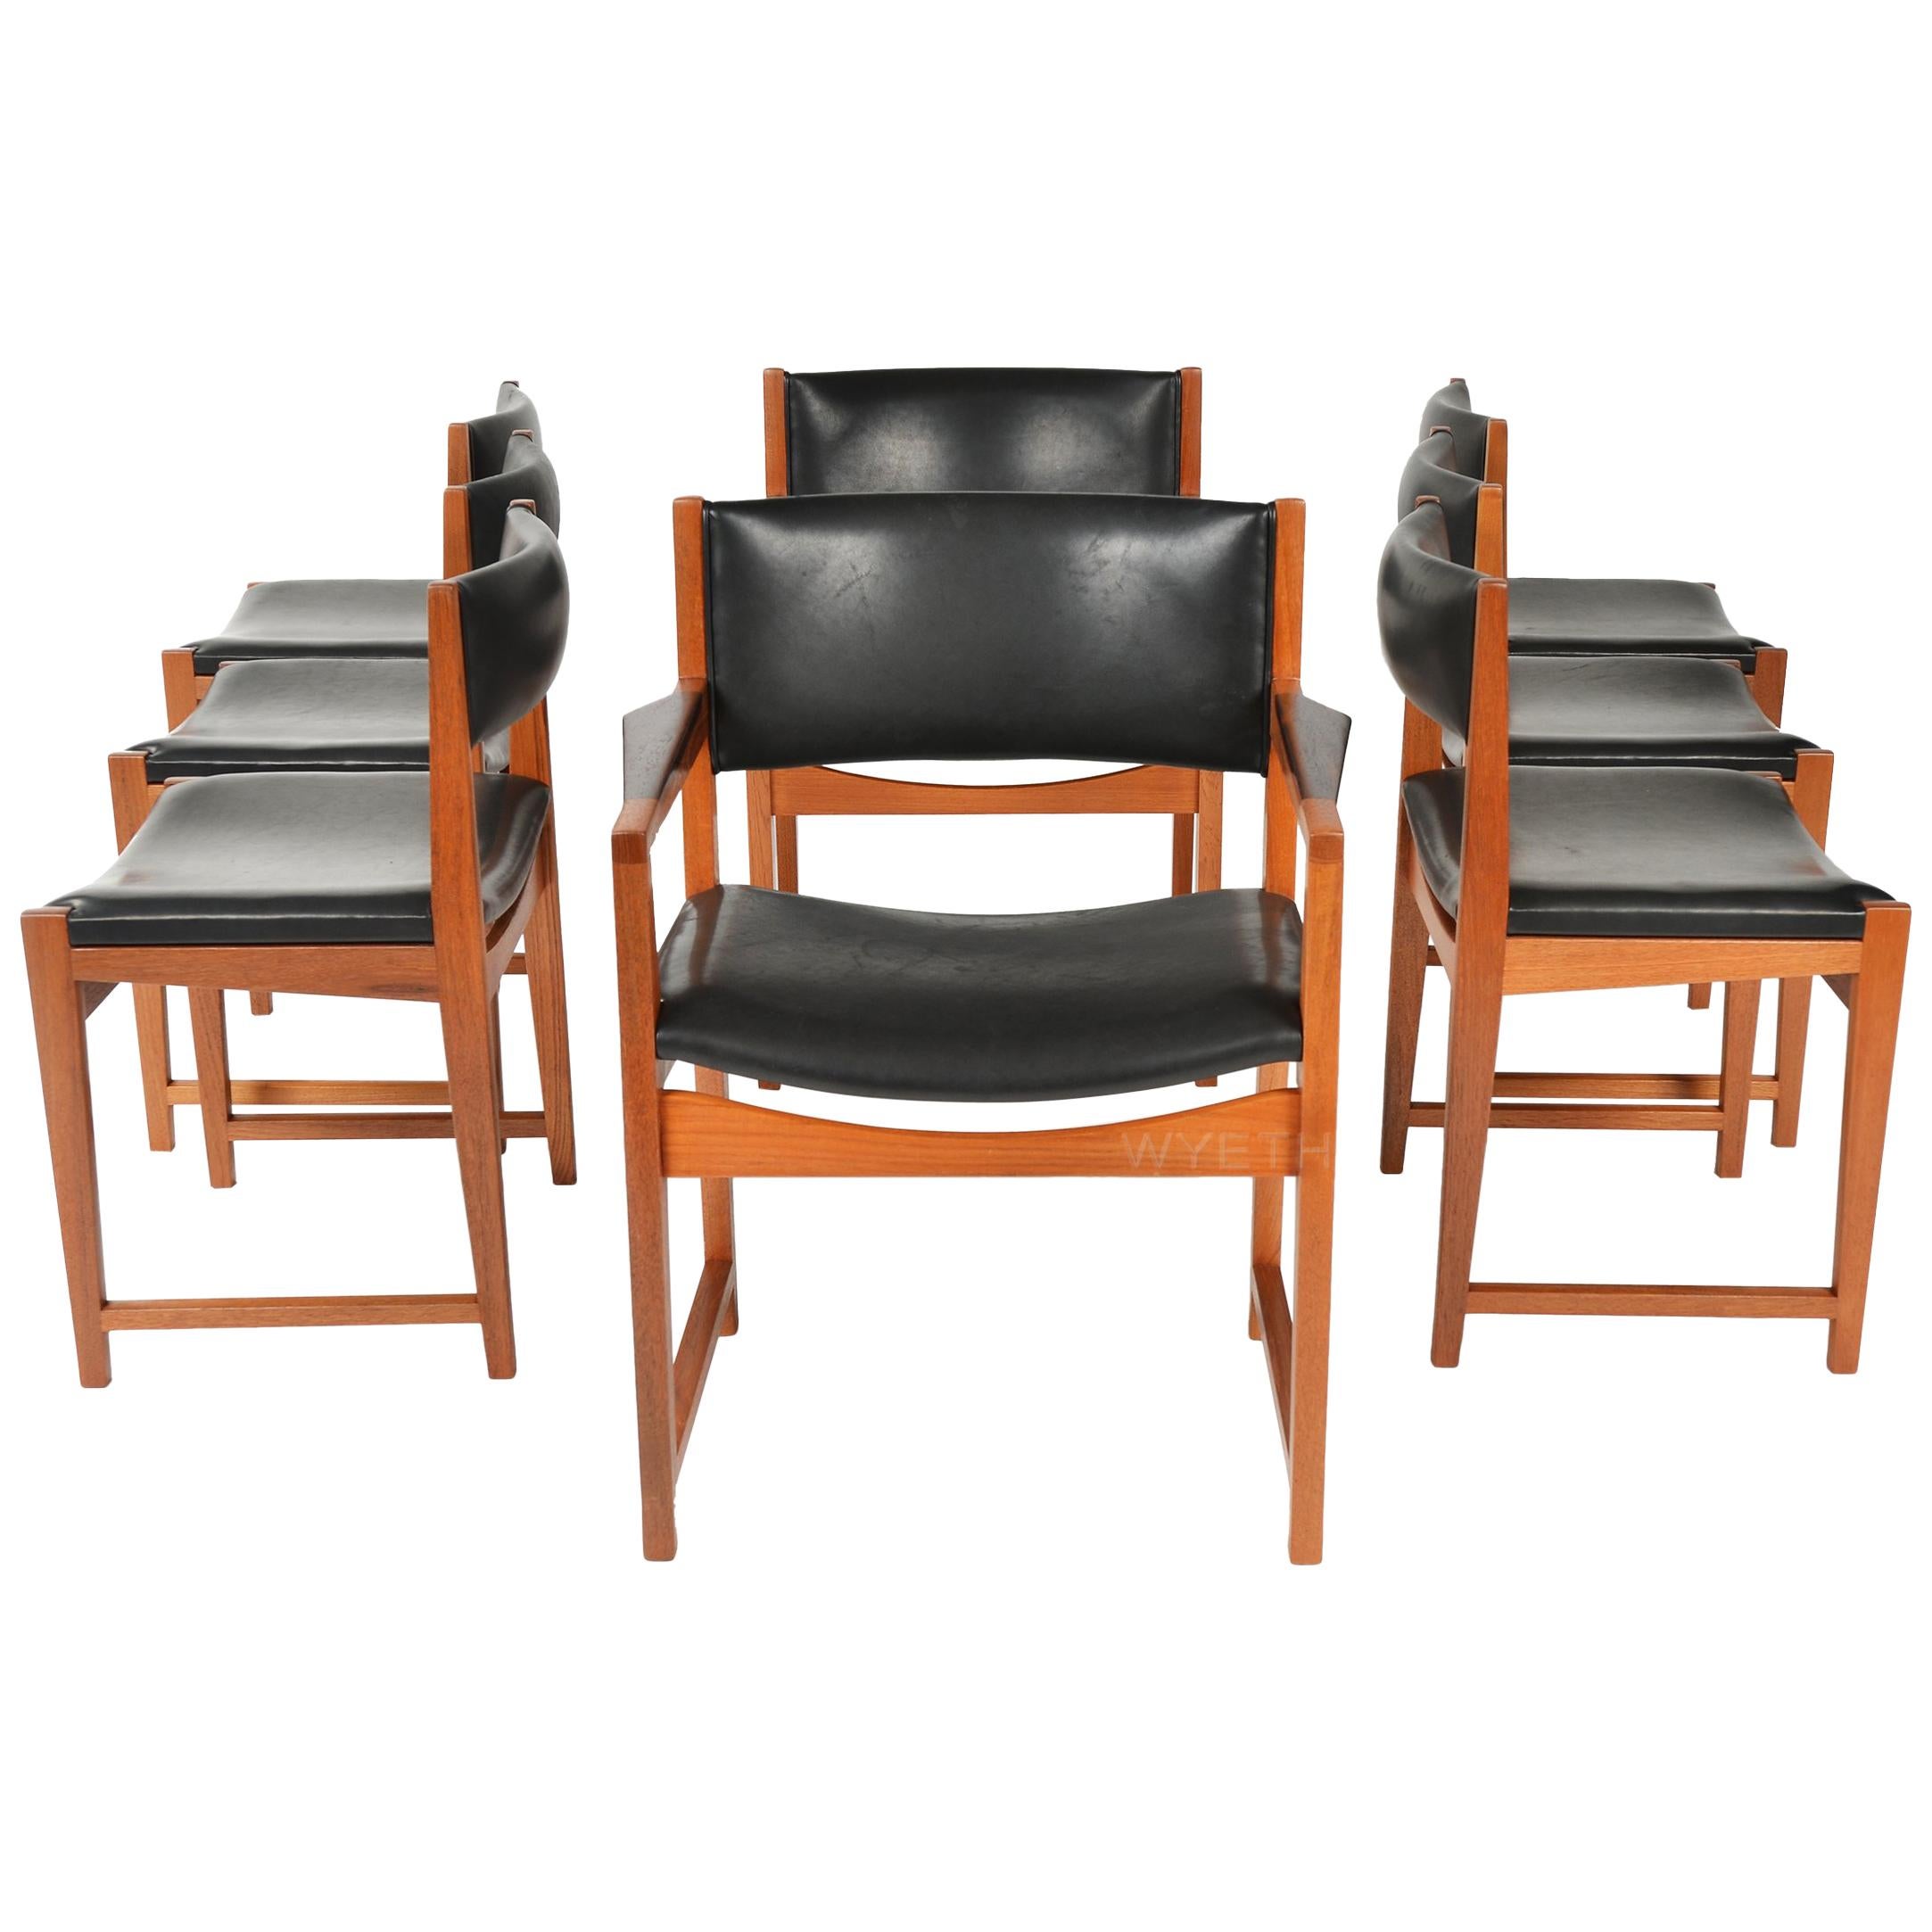 Mid-20th Century 1950s Danish Set of Eight Dining Chairs by Peter Hvidt & Orla Mölgaard-Nielsen For Sale